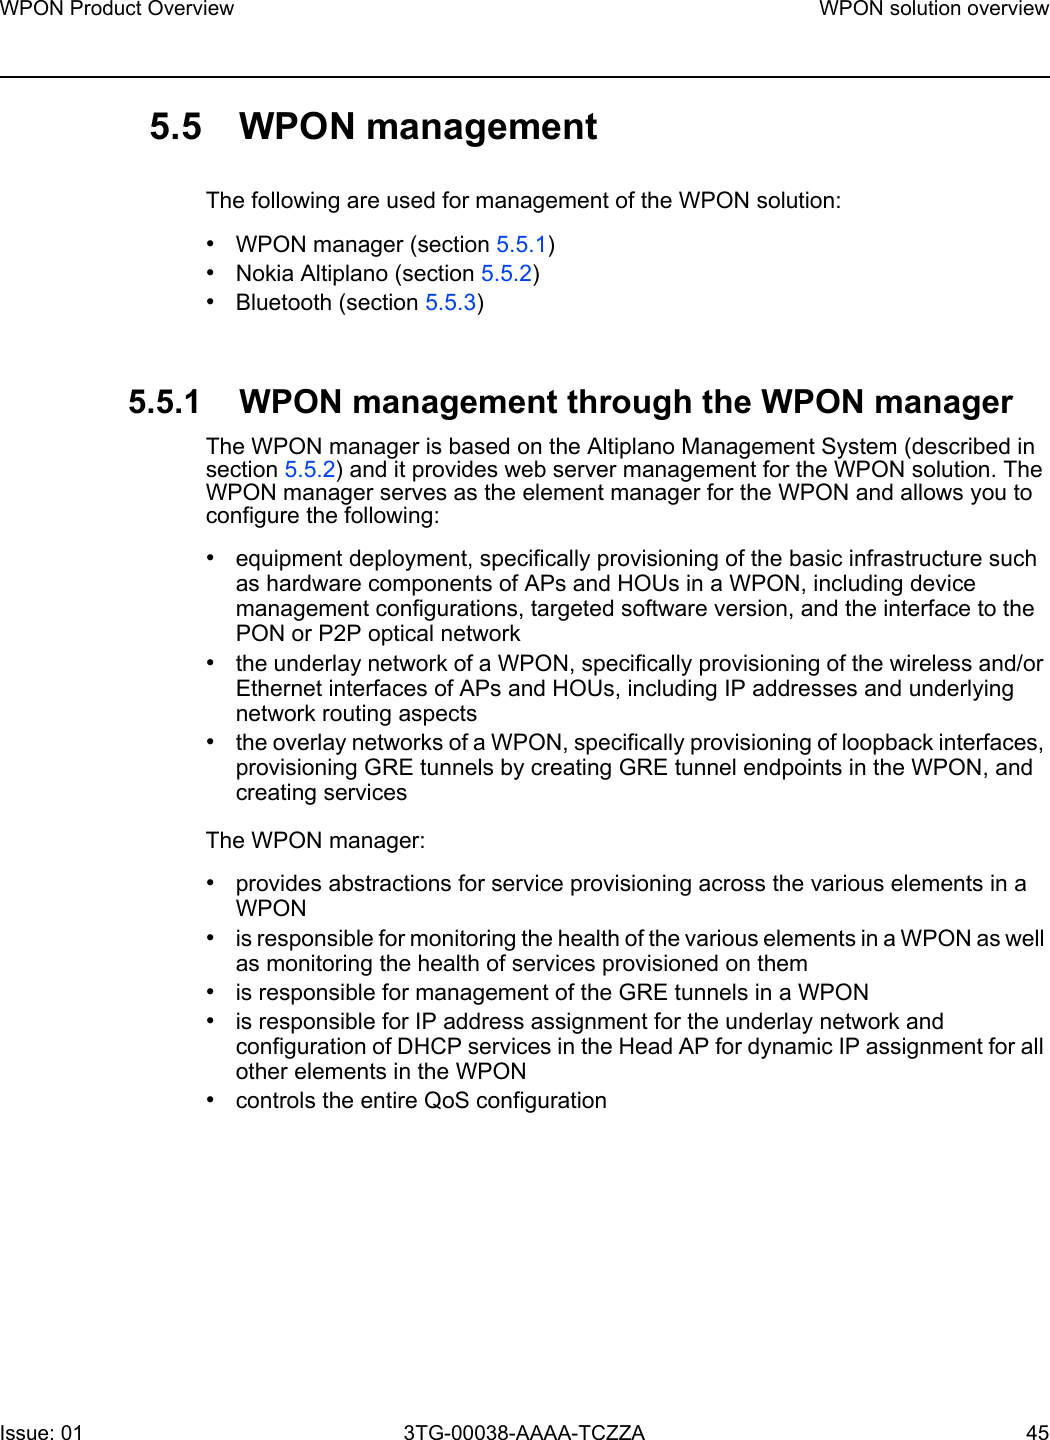 WPON Product Overview WPON solution overviewIssue: 01 3TG-00038-AAAA-TCZZA 45 5.5 WPON managementThe following are used for management of the WPON solution:•WPON manager (section 5.5.1)•Nokia Altiplano (section 5.5.2)•Bluetooth (section 5.5.3)5.5.1 WPON management through the WPON manager The WPON manager is based on the Altiplano Management System (described in section 5.5.2) and it provides web server management for the WPON solution. The WPON manager serves as the element manager for the WPON and allows you to configure the following:•equipment deployment, specifically provisioning of the basic infrastructure such as hardware components of APs and HOUs in a WPON, including device management configurations, targeted software version, and the interface to the PON or P2P optical network•the underlay network of a WPON, specifically provisioning of the wireless and/or Ethernet interfaces of APs and HOUs, including IP addresses and underlying network routing aspects•the overlay networks of a WPON, specifically provisioning of loopback interfaces, provisioning GRE tunnels by creating GRE tunnel endpoints in the WPON, and creating servicesThe WPON manager:•provides abstractions for service provisioning across the various elements in a WPON•is responsible for monitoring the health of the various elements in a WPON as well as monitoring the health of services provisioned on them•is responsible for management of the GRE tunnels in a WPON•is responsible for IP address assignment for the underlay network and configuration of DHCP services in the Head AP for dynamic IP assignment for all other elements in the WPON•controls the entire QoS configuration 